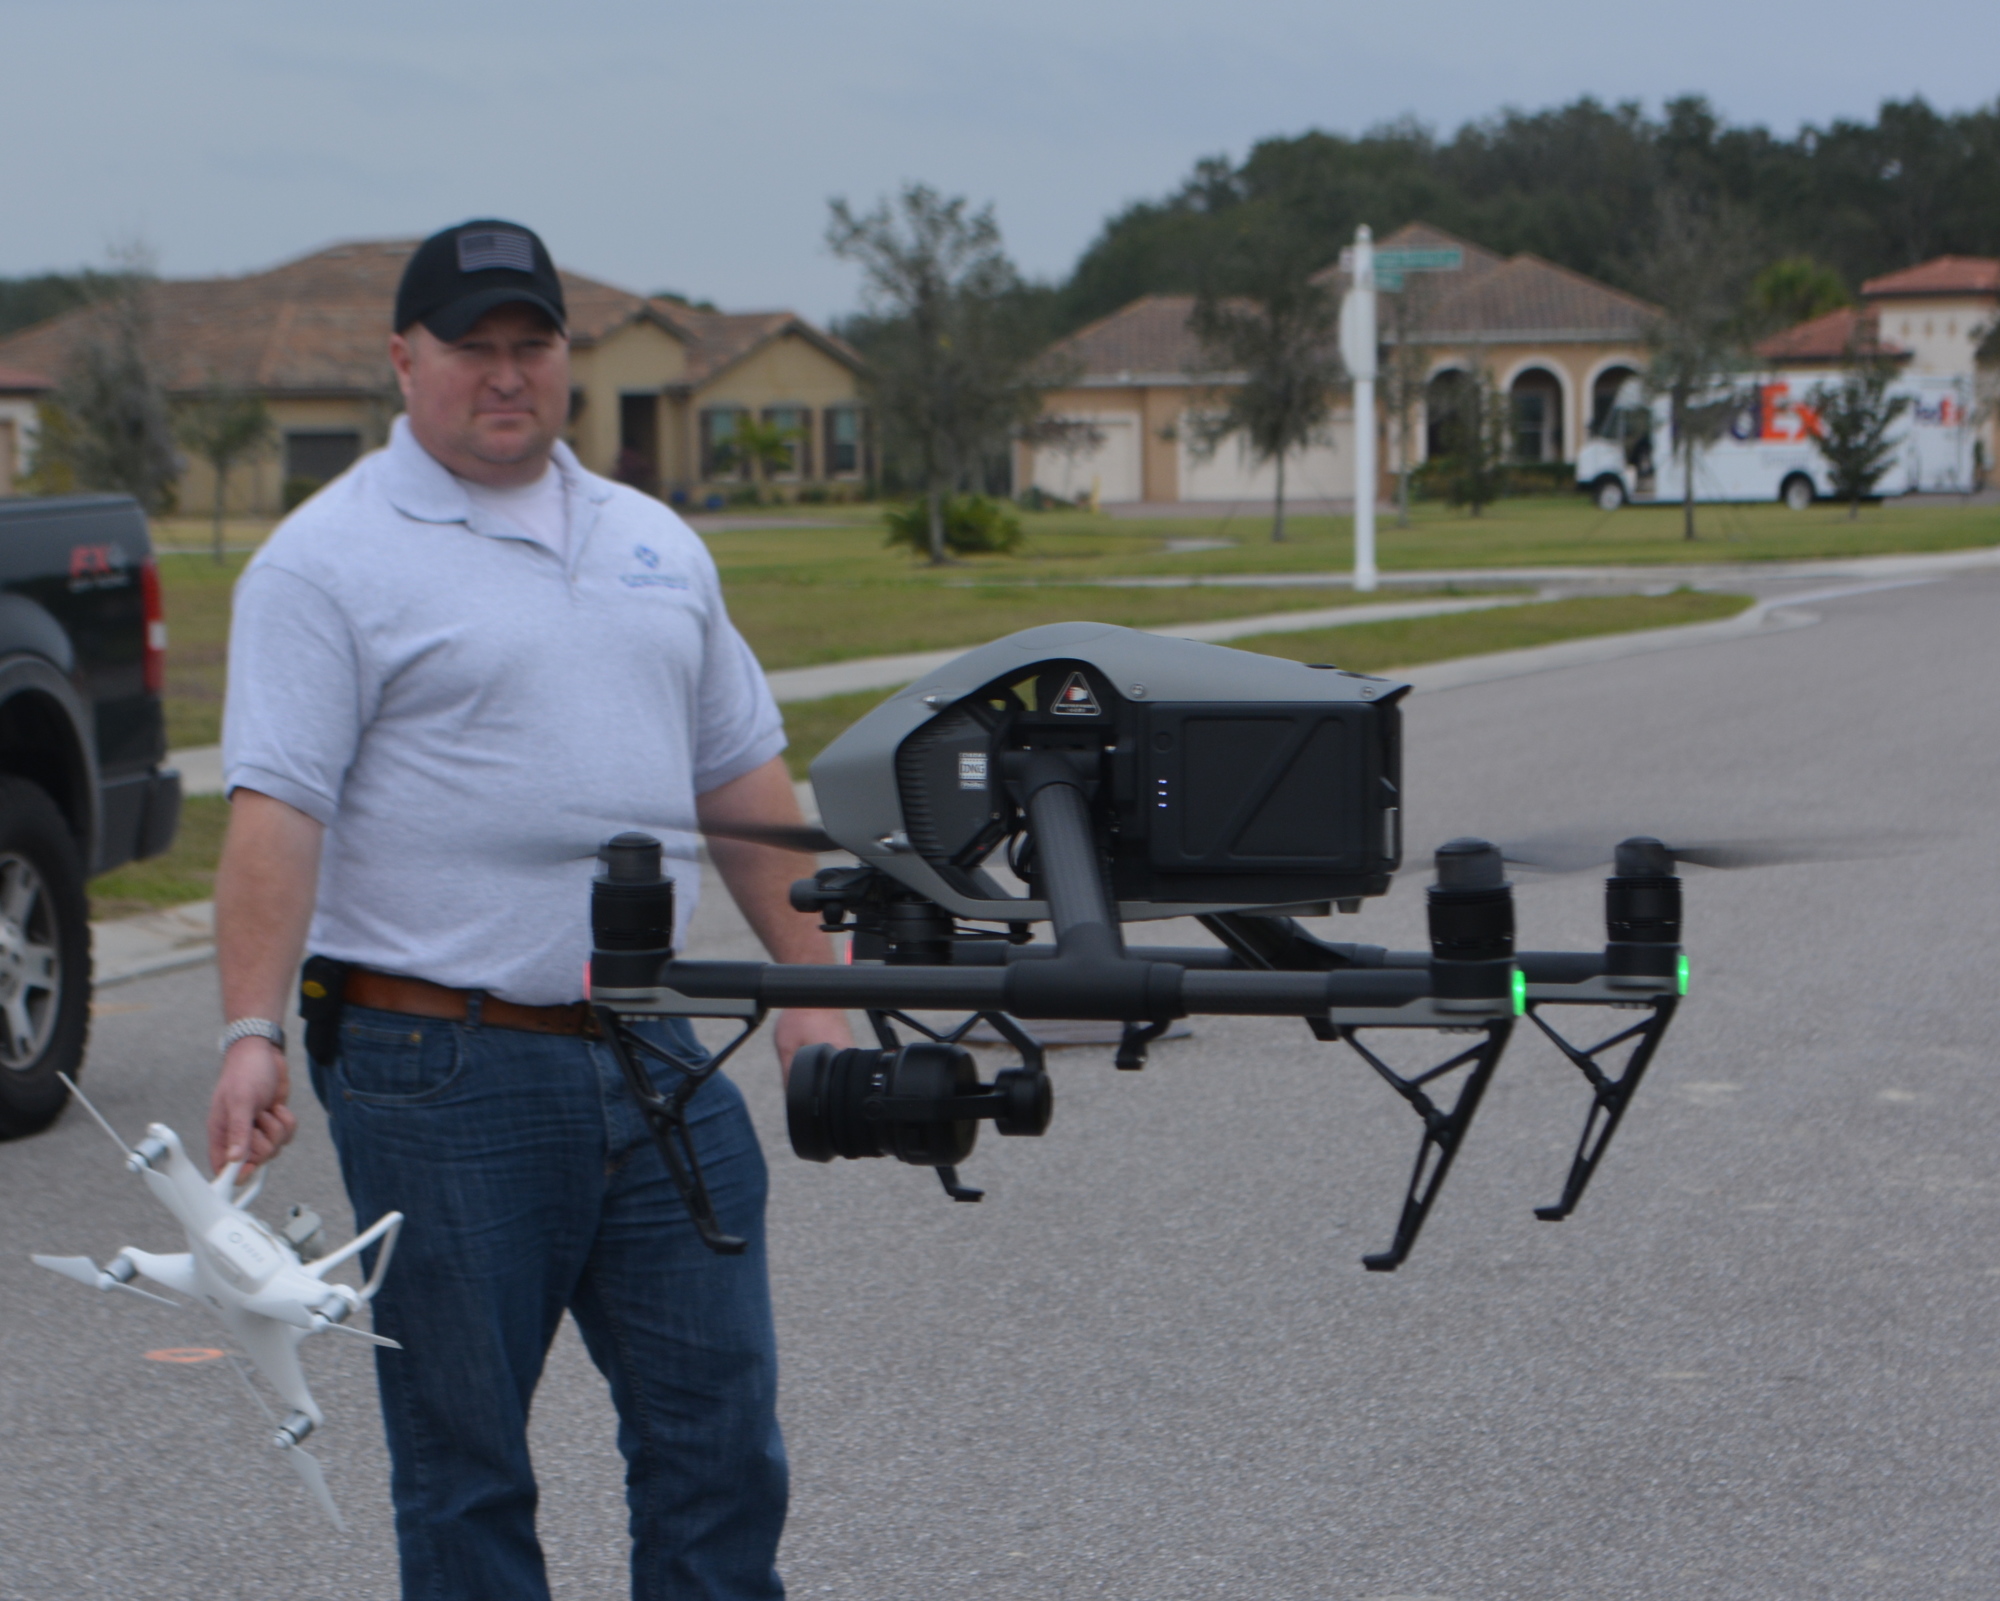 C.J. Carlock watches his partner, Chad Cox, demonstrate the flying capabilities of a drone.